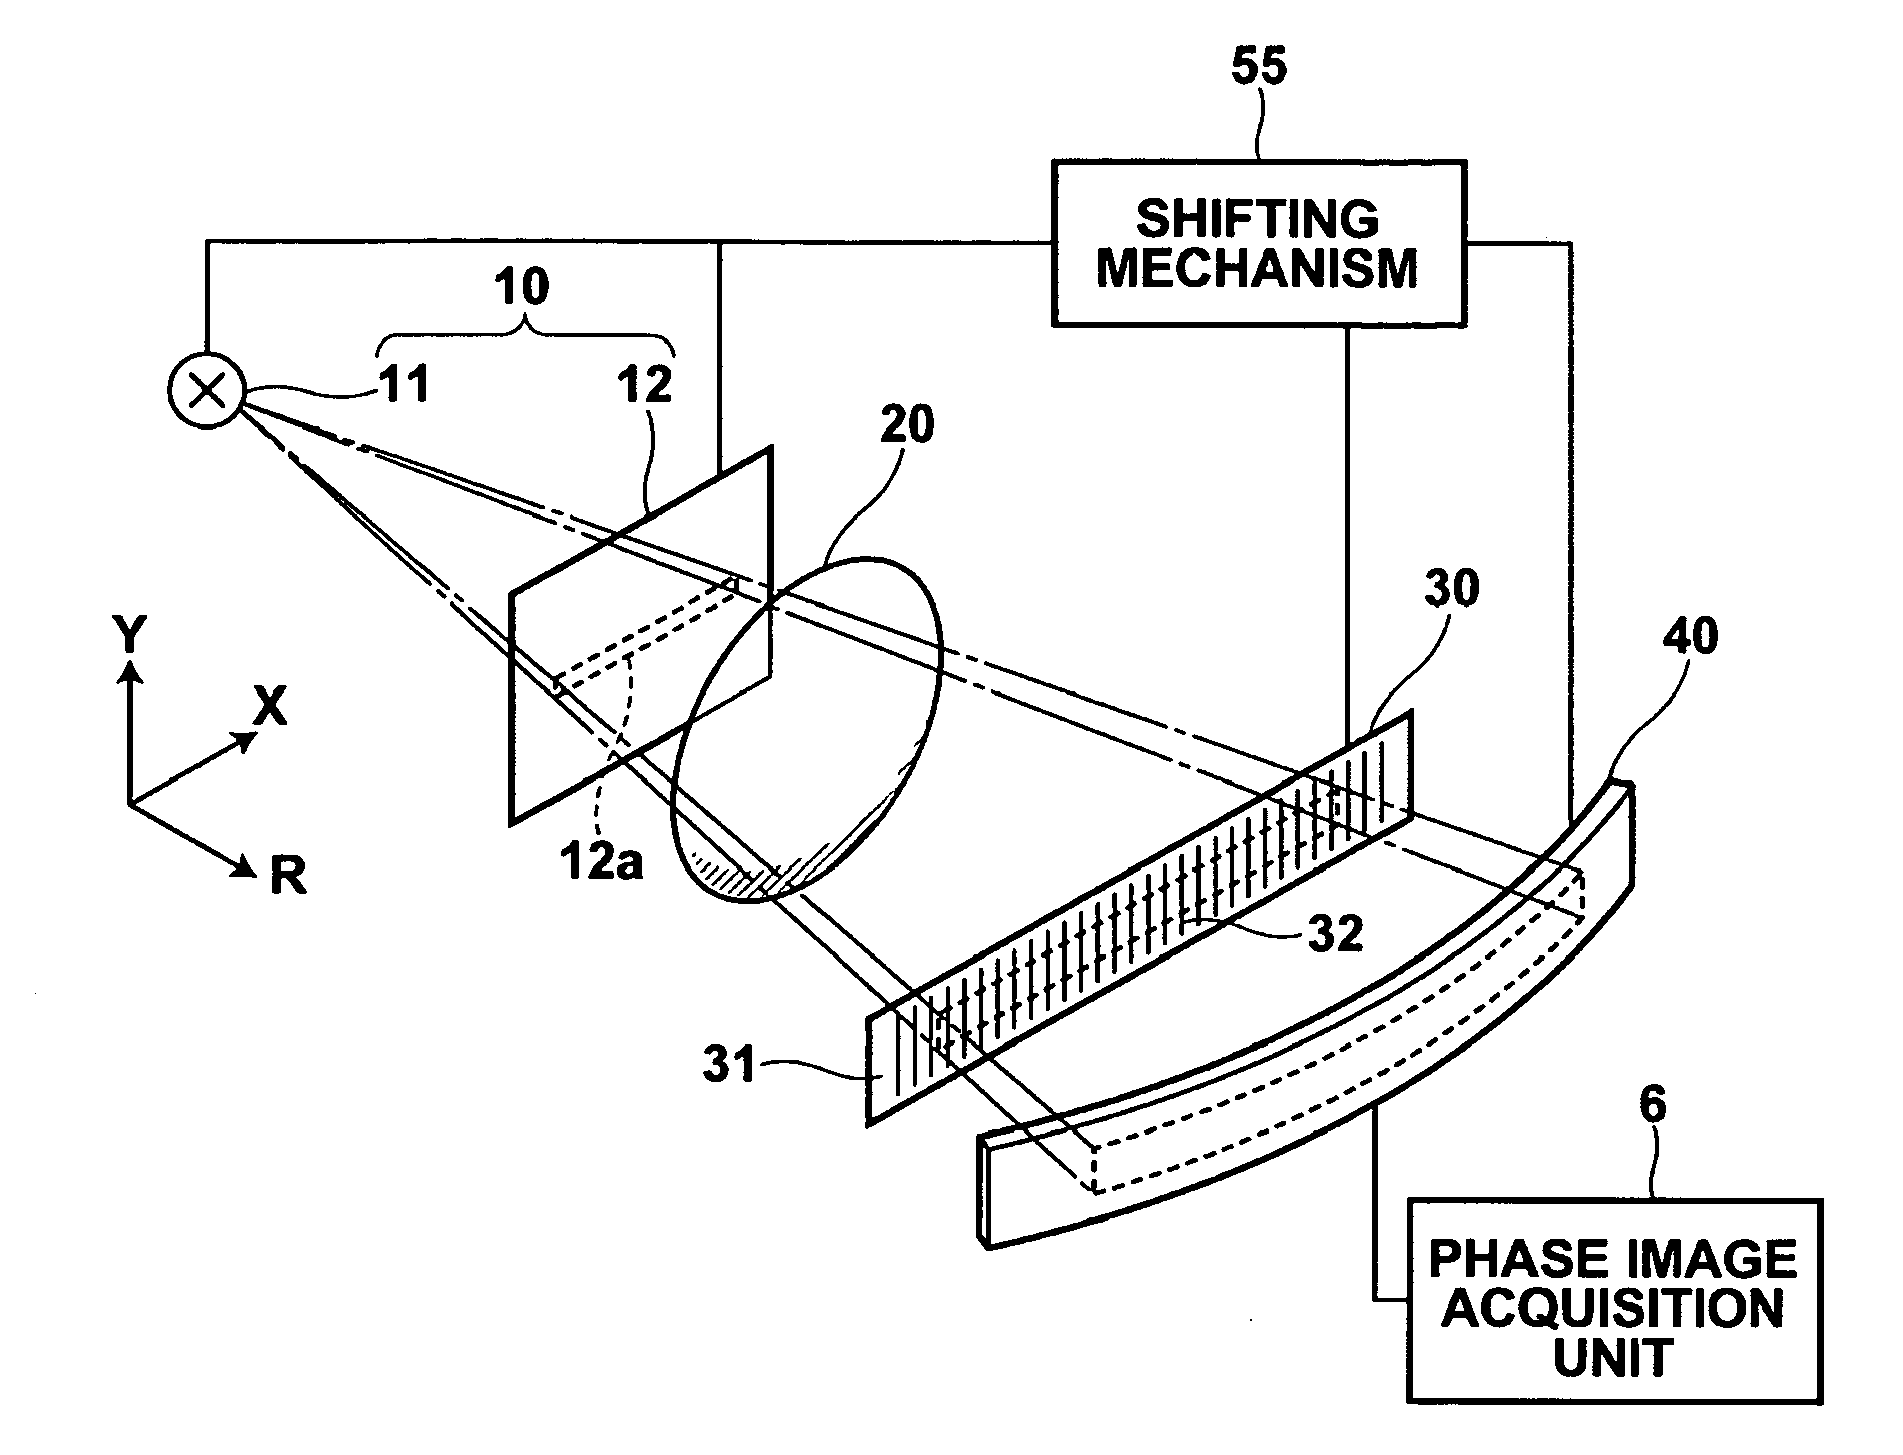 Radiation phase contrast imaging apparatus